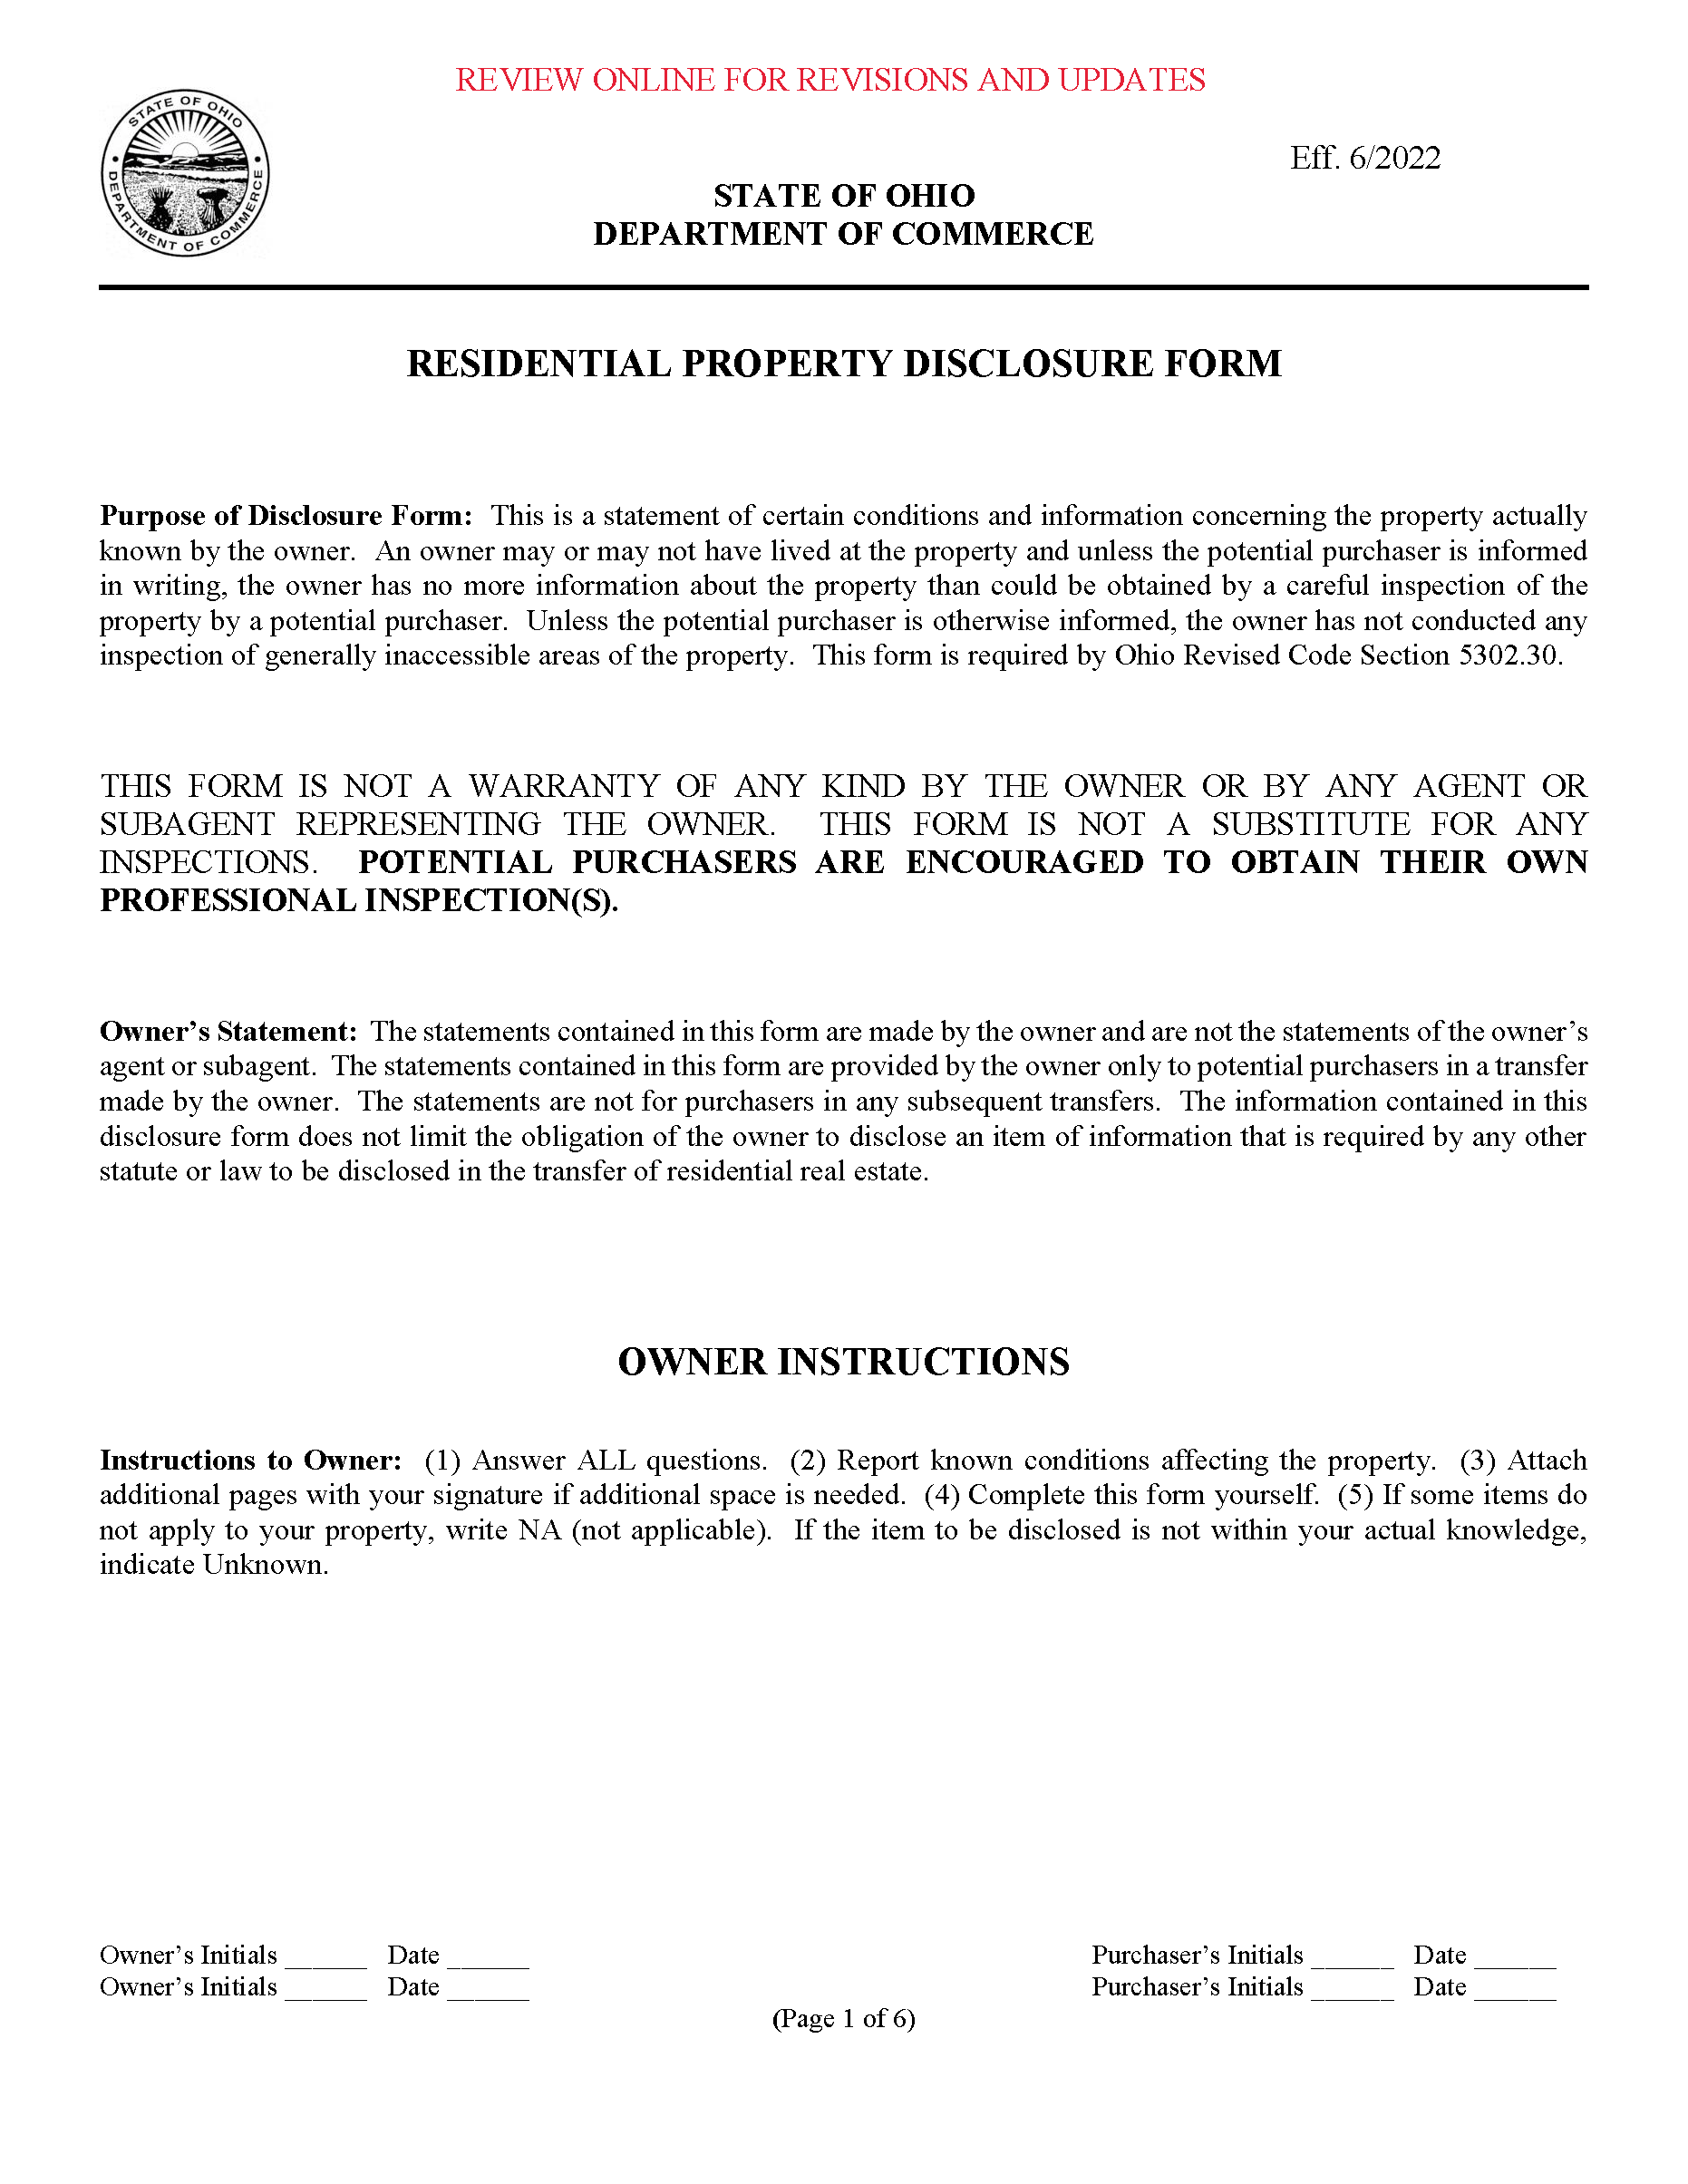 Guernsey County Residential Property Disclosure 